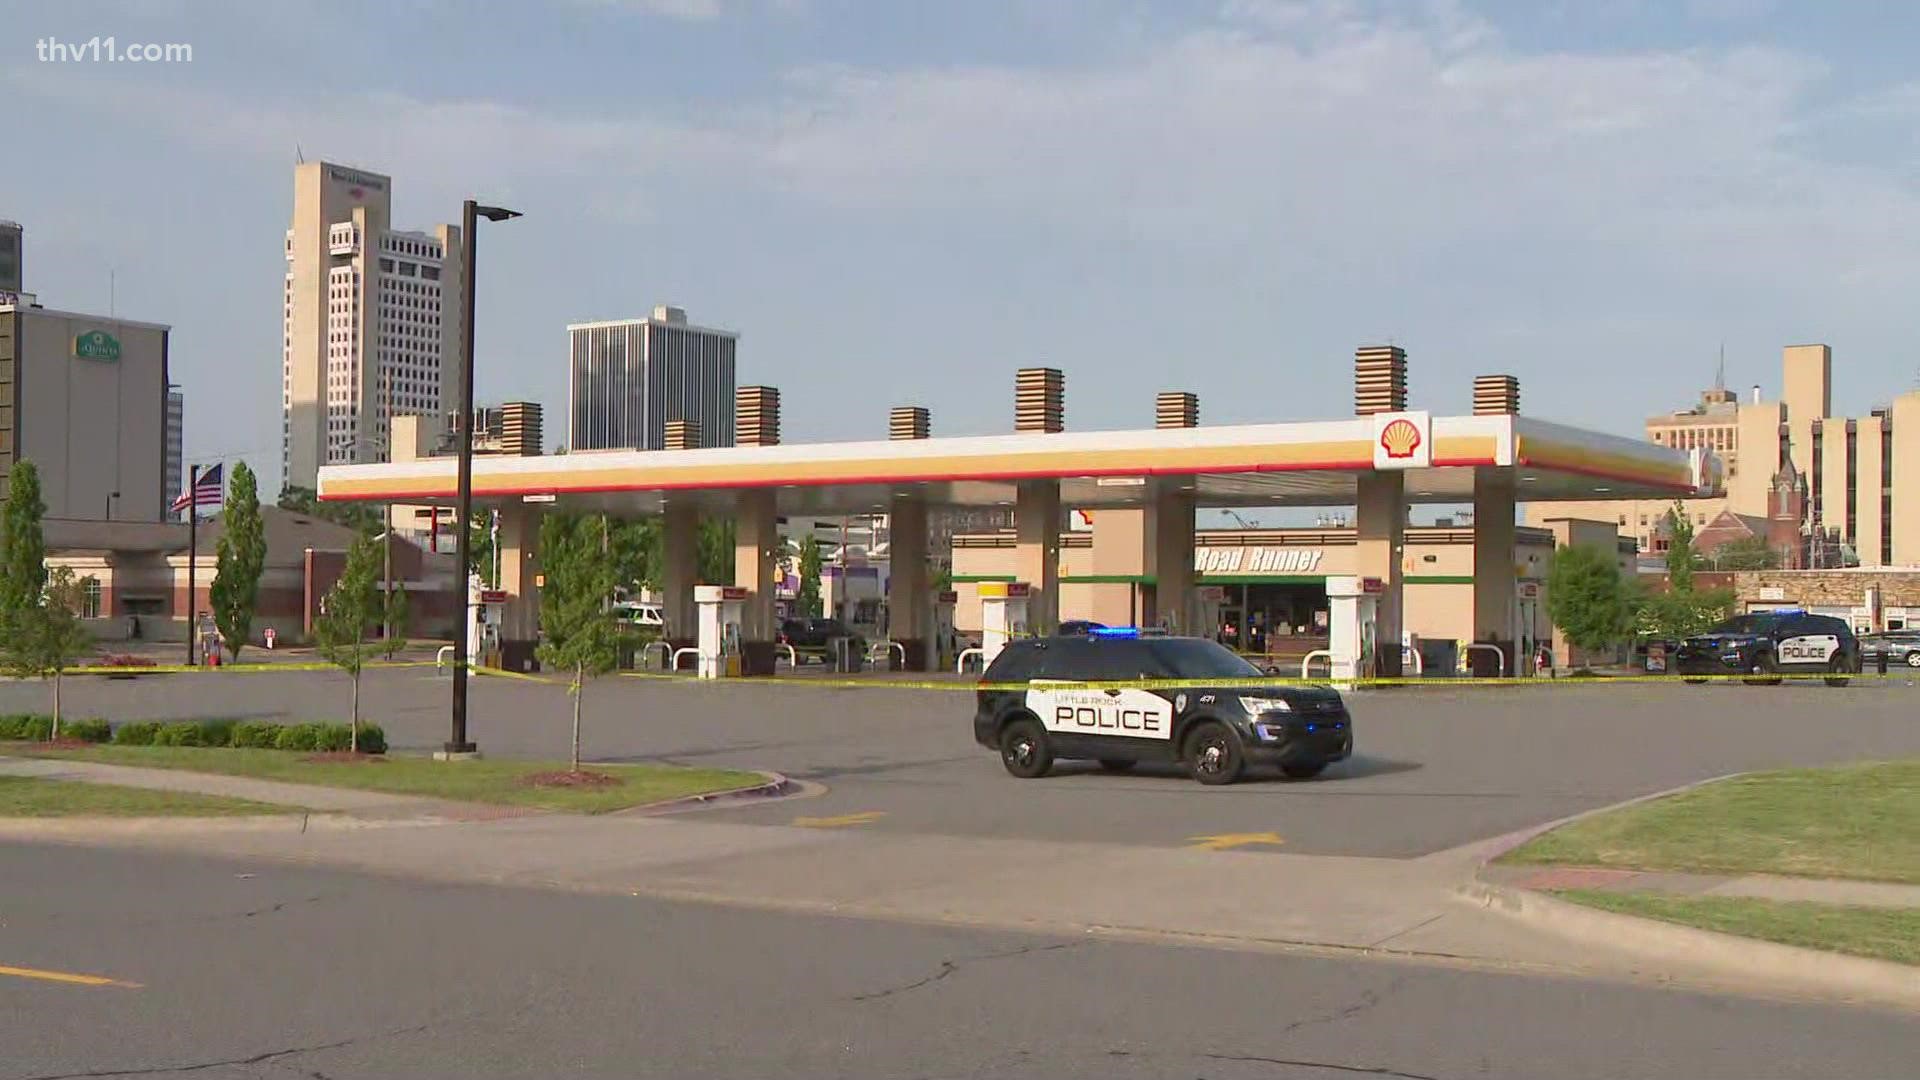 At least one person is dead after a shooting at a Little Rock gas station on Broadway Street.